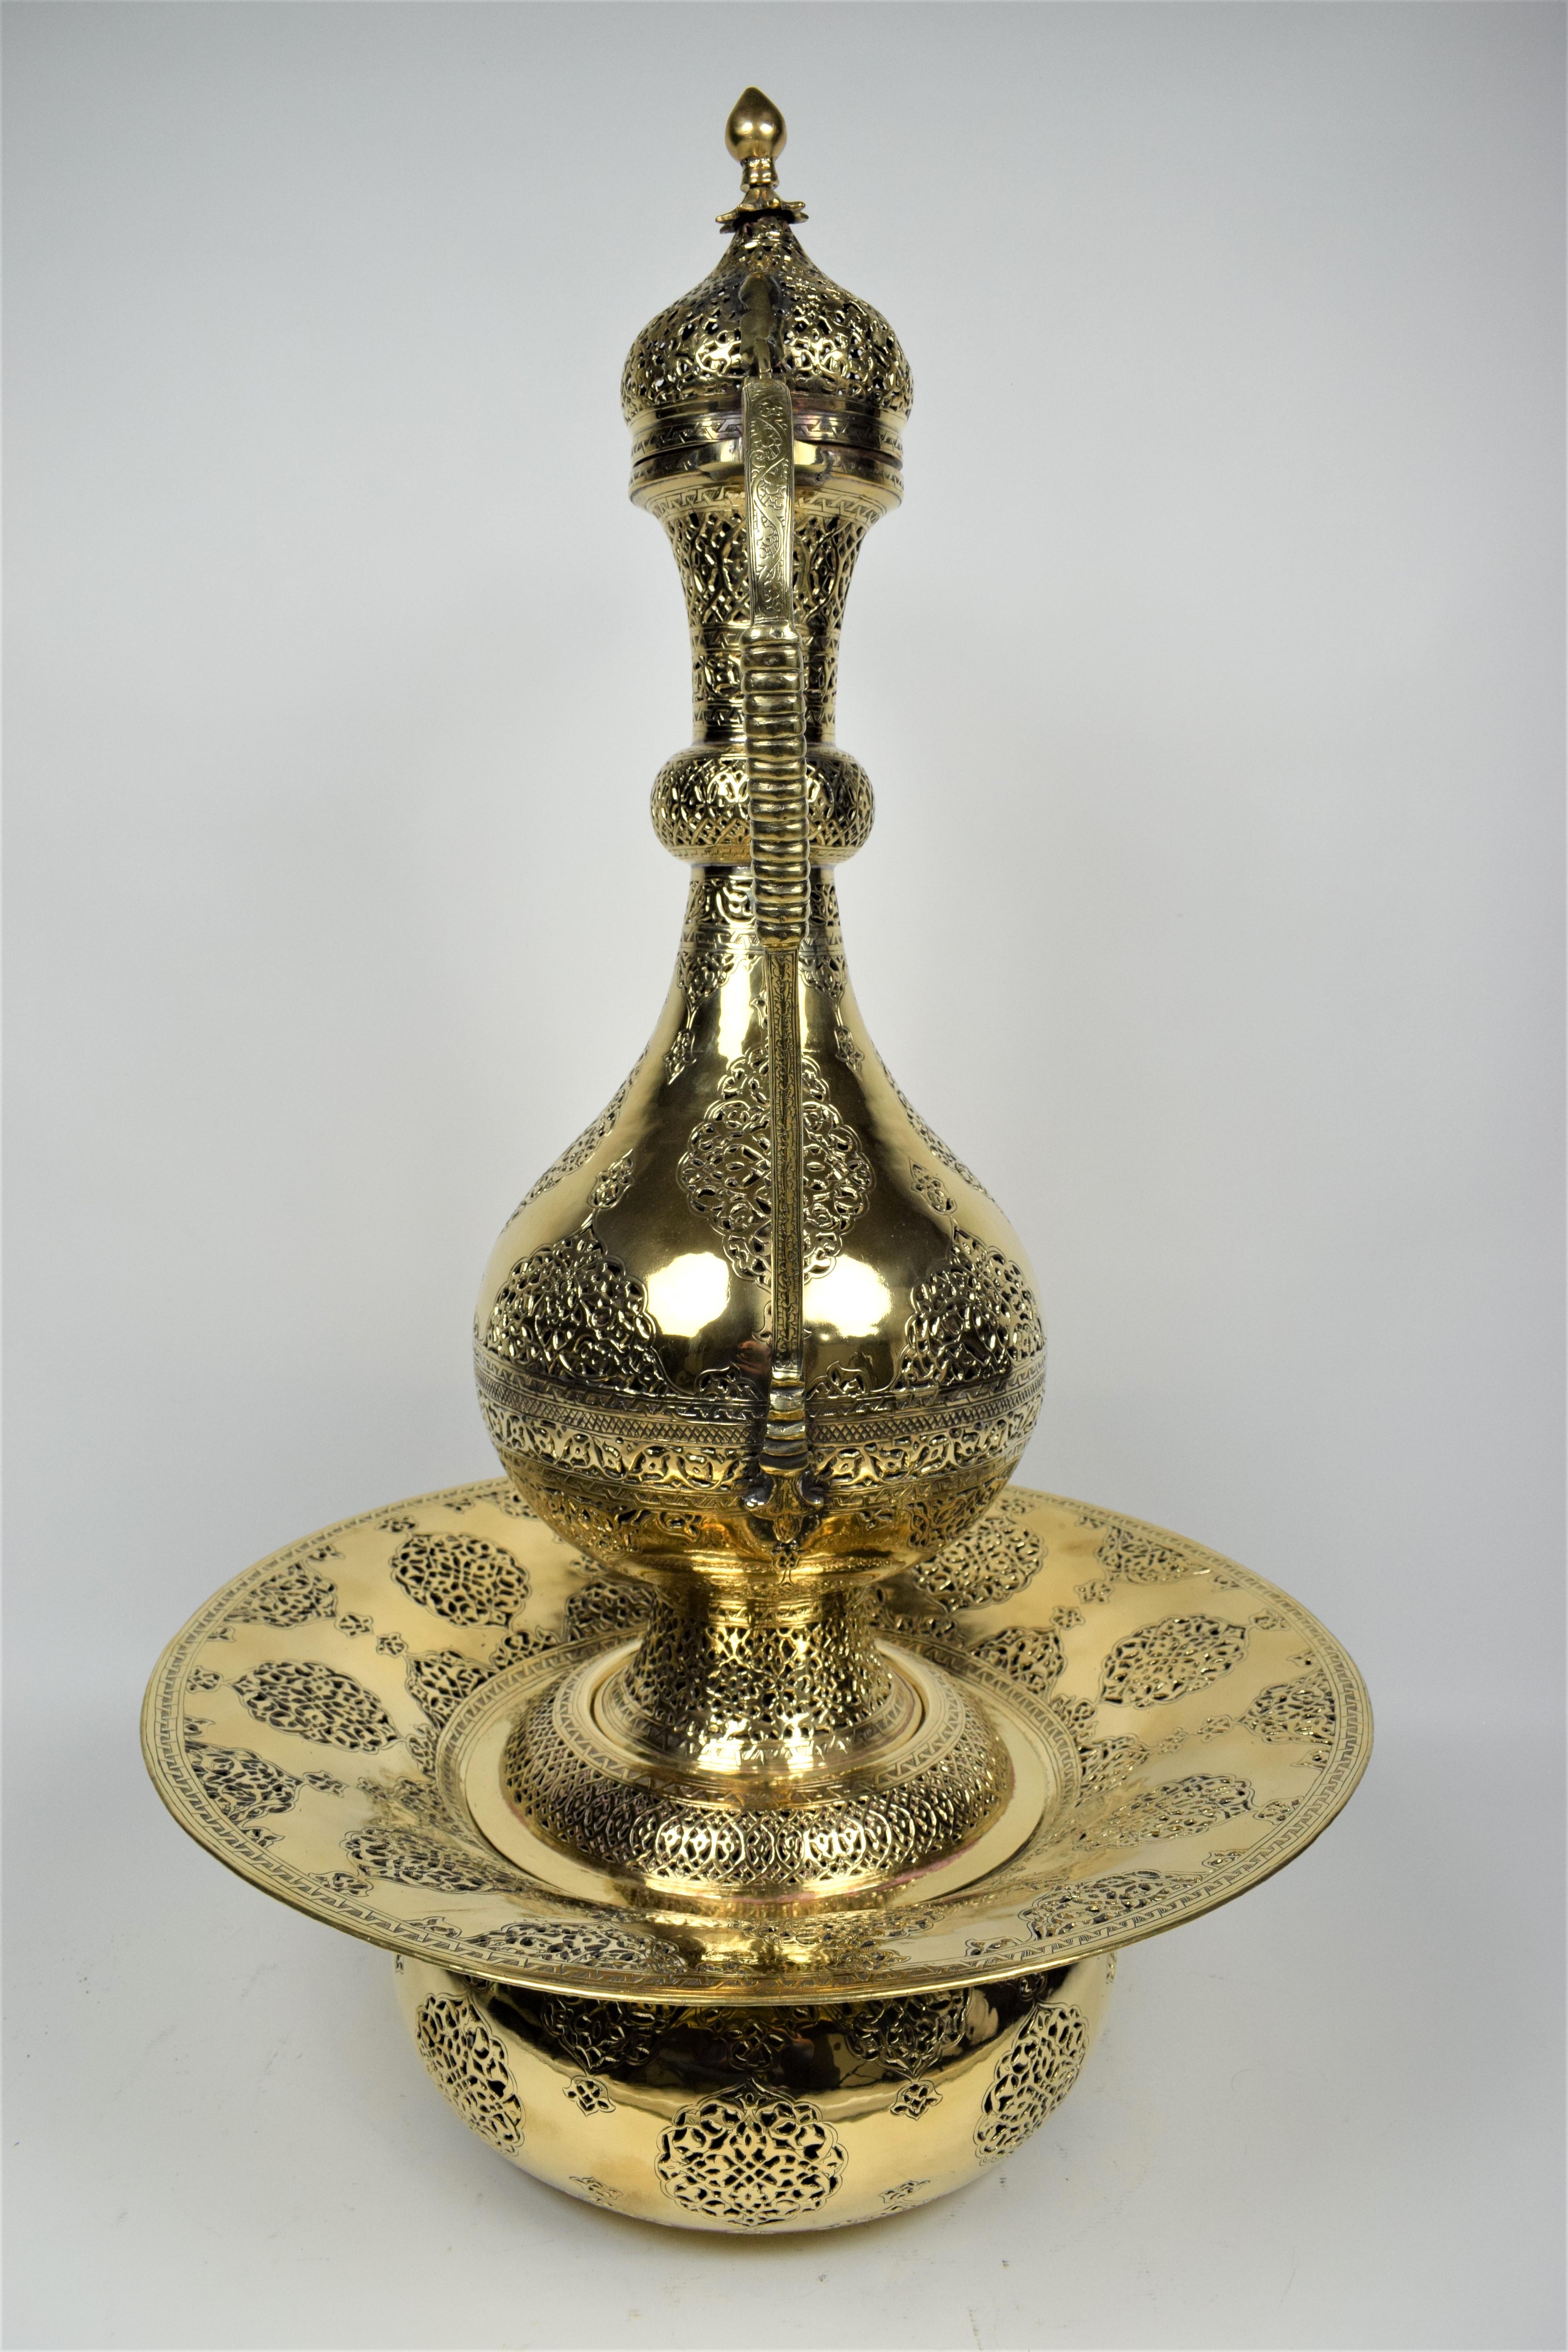 Persian brass cutwork ewer and basin set, early 20th century
An exquisite 3-piece ensemble consisting of a circular basin, cover and Ewer which have been intricately engraved with several bands of decoration in geometrical and vegetal cutwork. The